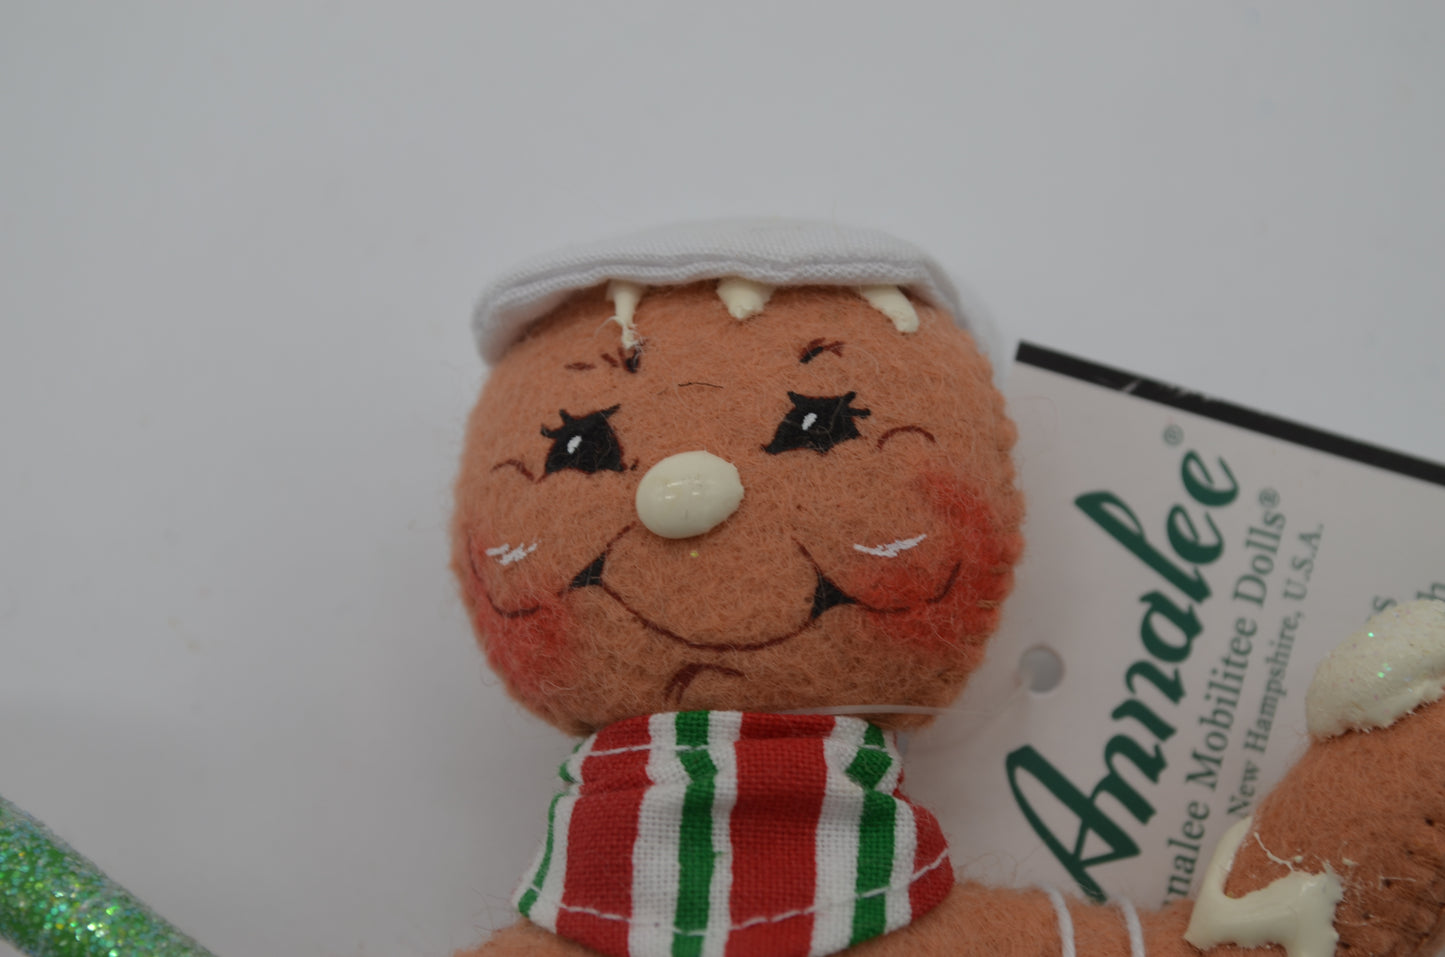 5" Frosting Fun Gingerbread with Shovel 969306 Annalee